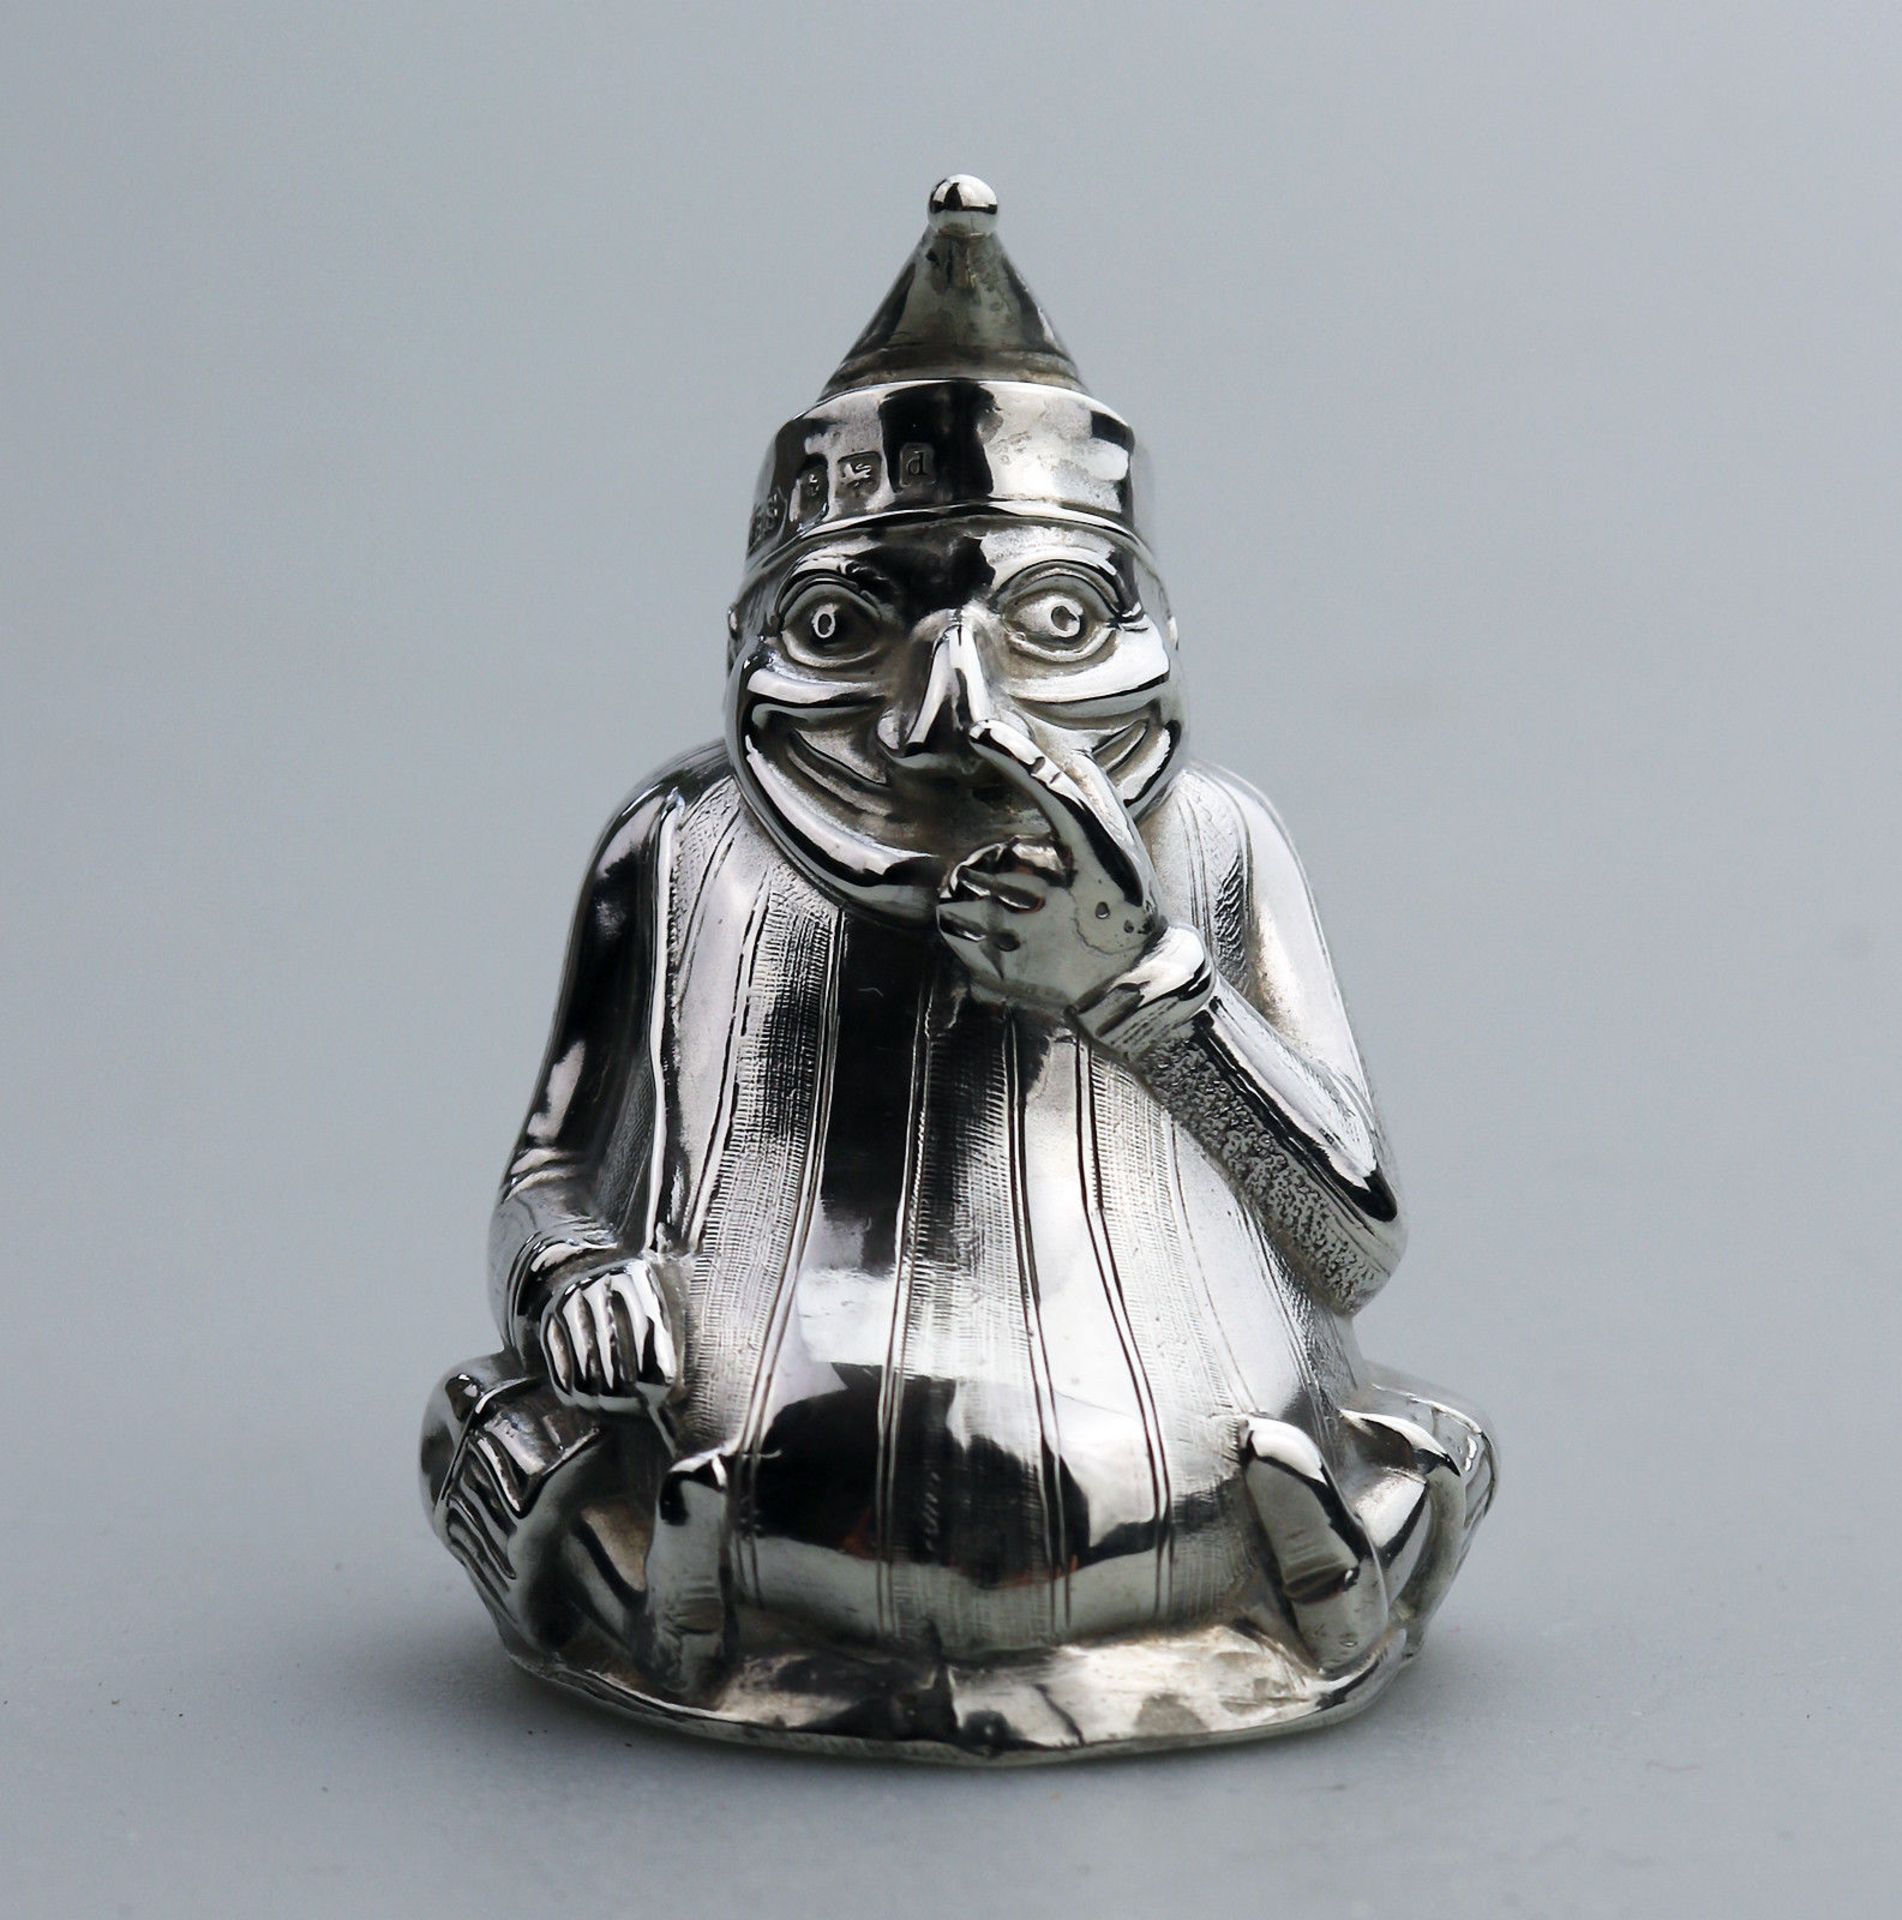 A rare solid silver novelty Mr Punch Pepper shaker by William Sparrow C.1903 - Image 2 of 8